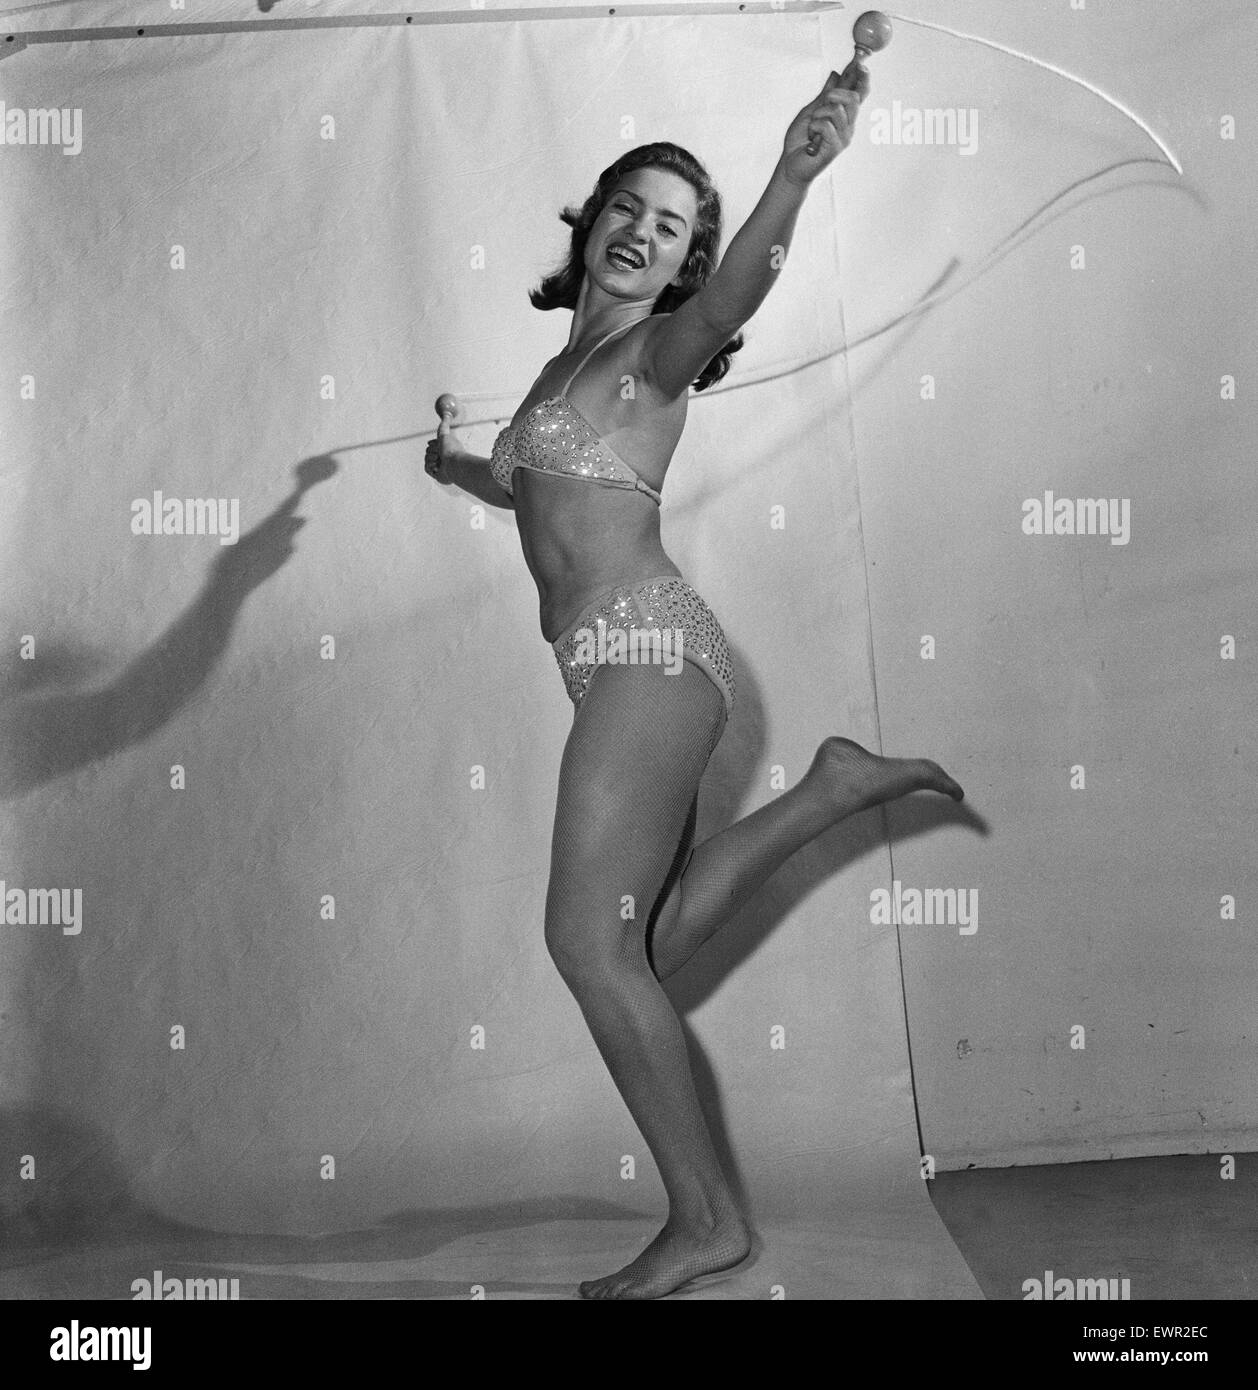 18 year old Eleanor Gunter, using a skipping rope, is an equilibrist, an acrobat who performs balancing feats. She's in the UK to appear at the Glasgow Empire theatre, 1st September 1957. Stock Photo